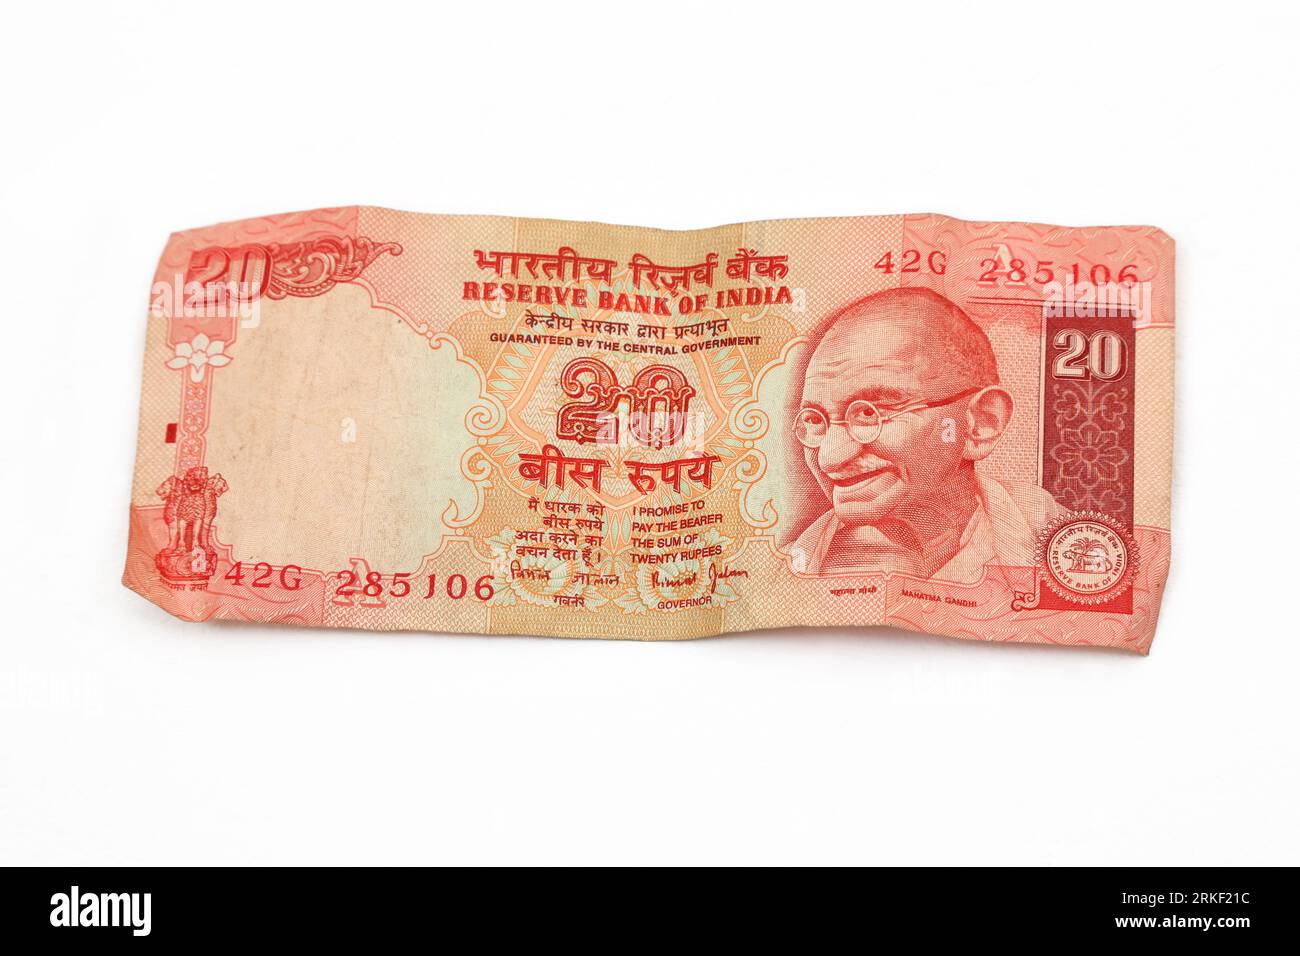 Reserve Bank of India Mahatma Gandhi Series 20 Rupees Banknote Issued 2001- Current Obverse Showing Portrait of Mahatma Gandhi Stock Photo